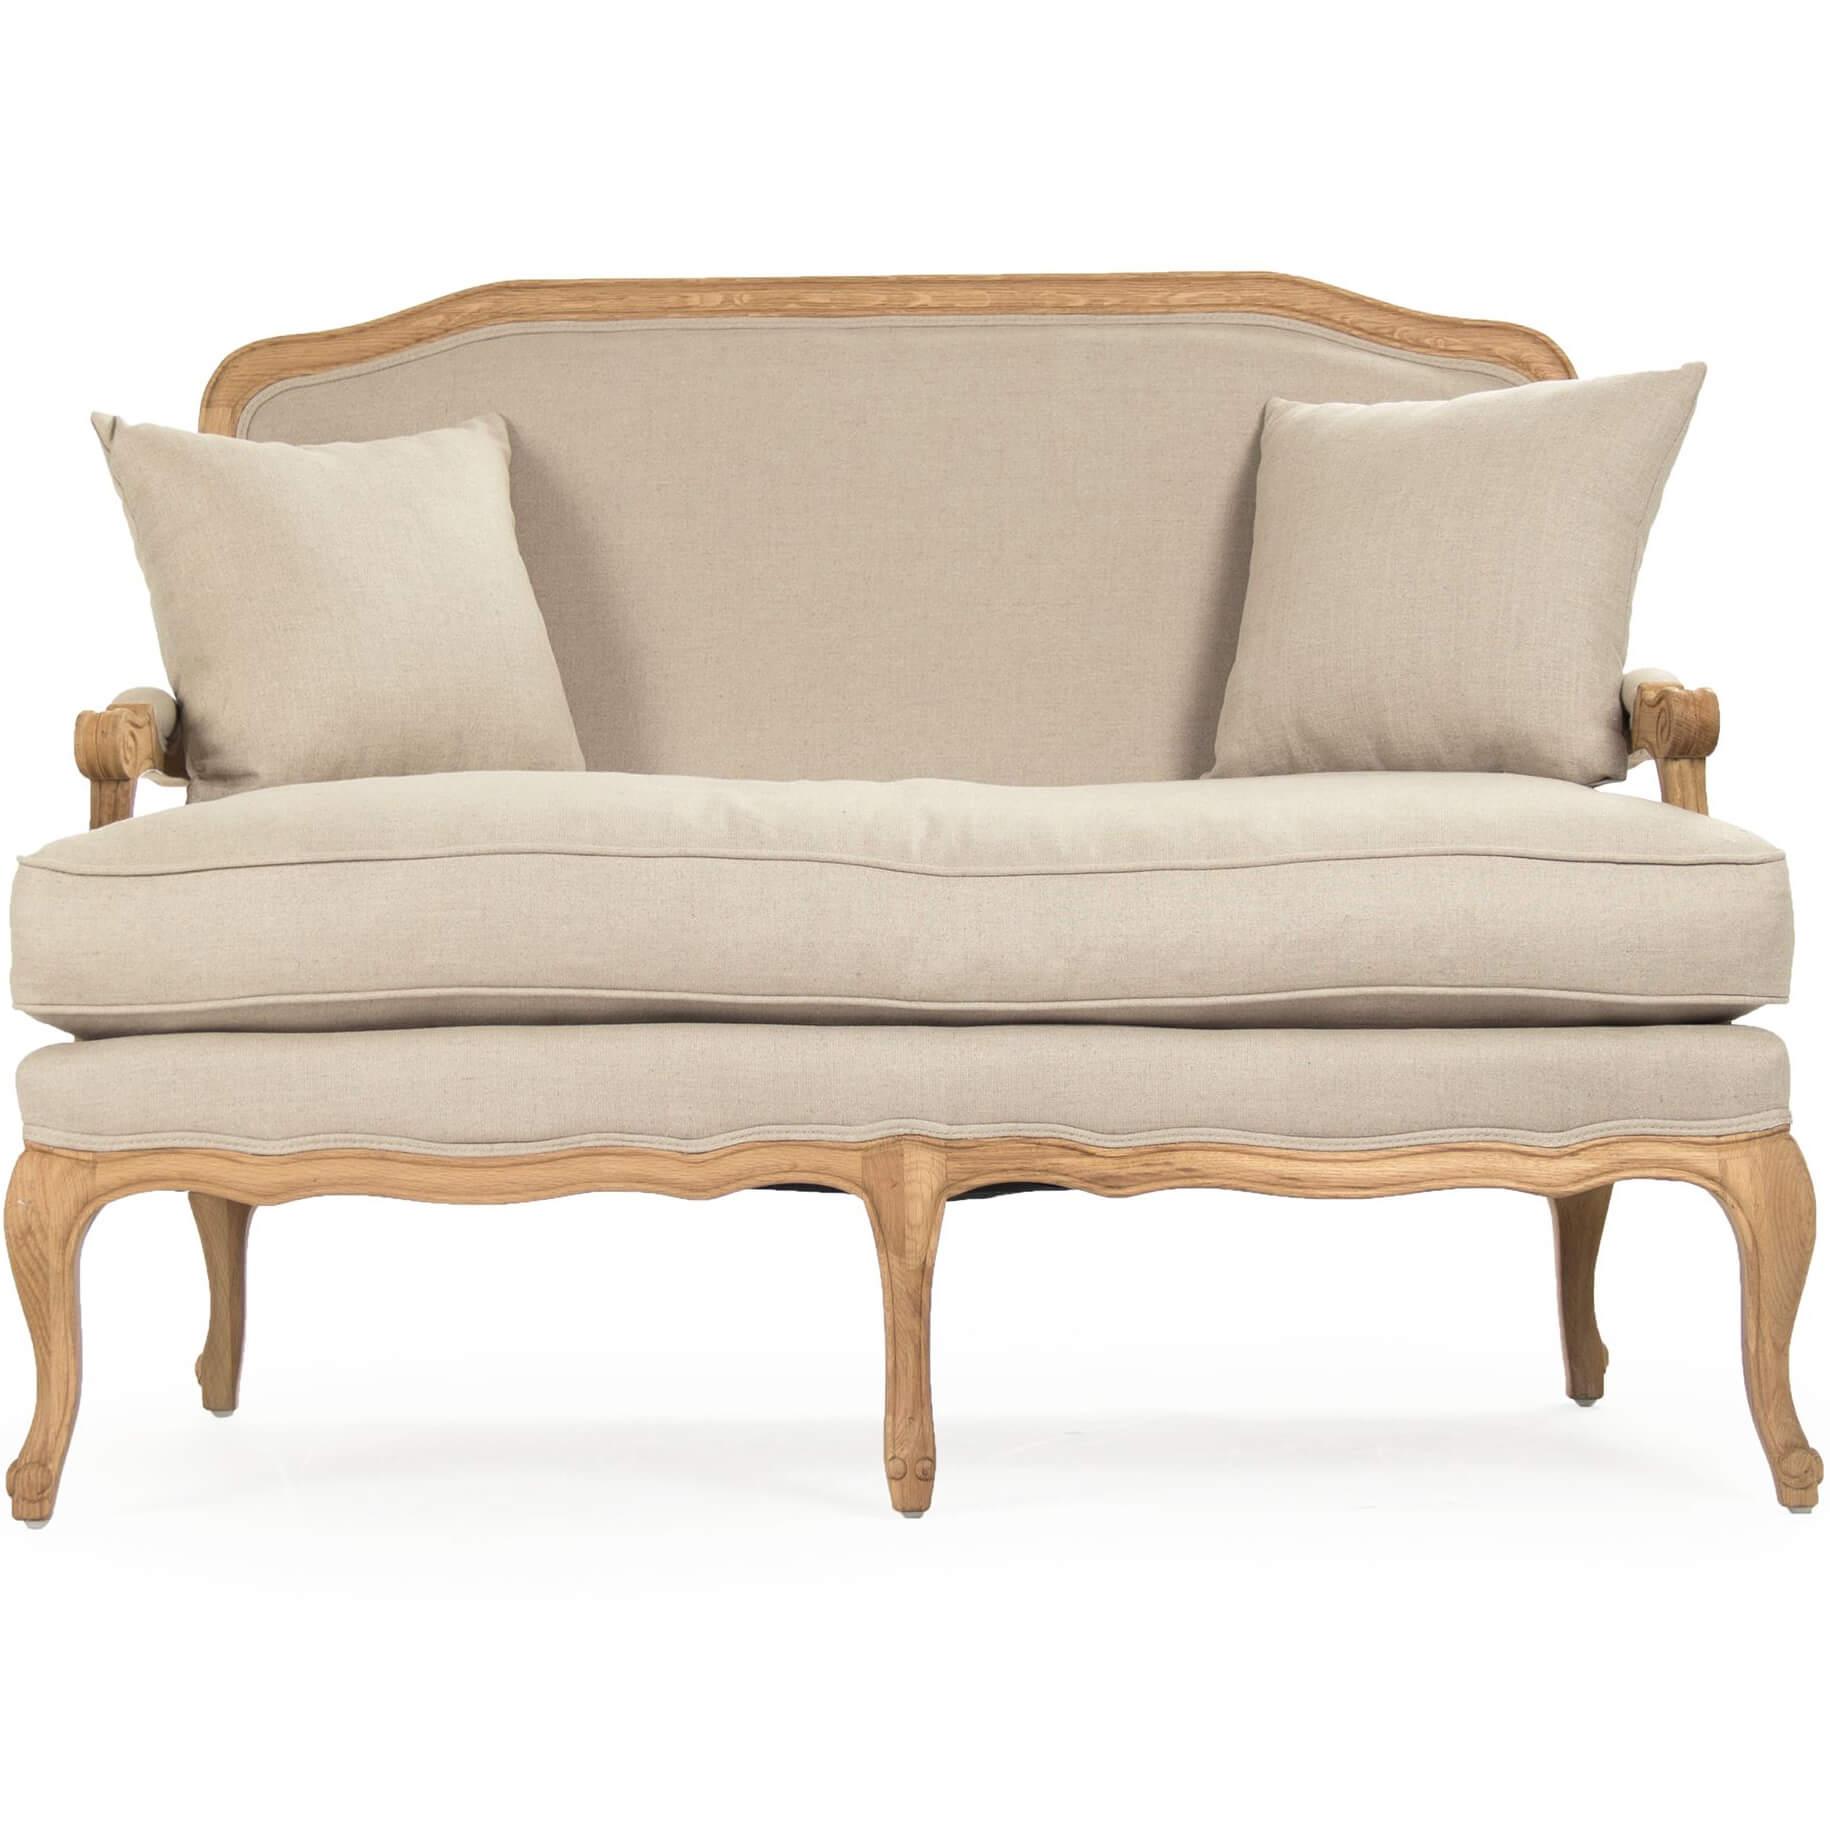 Provence Natural Wood Settee - Belle Escape